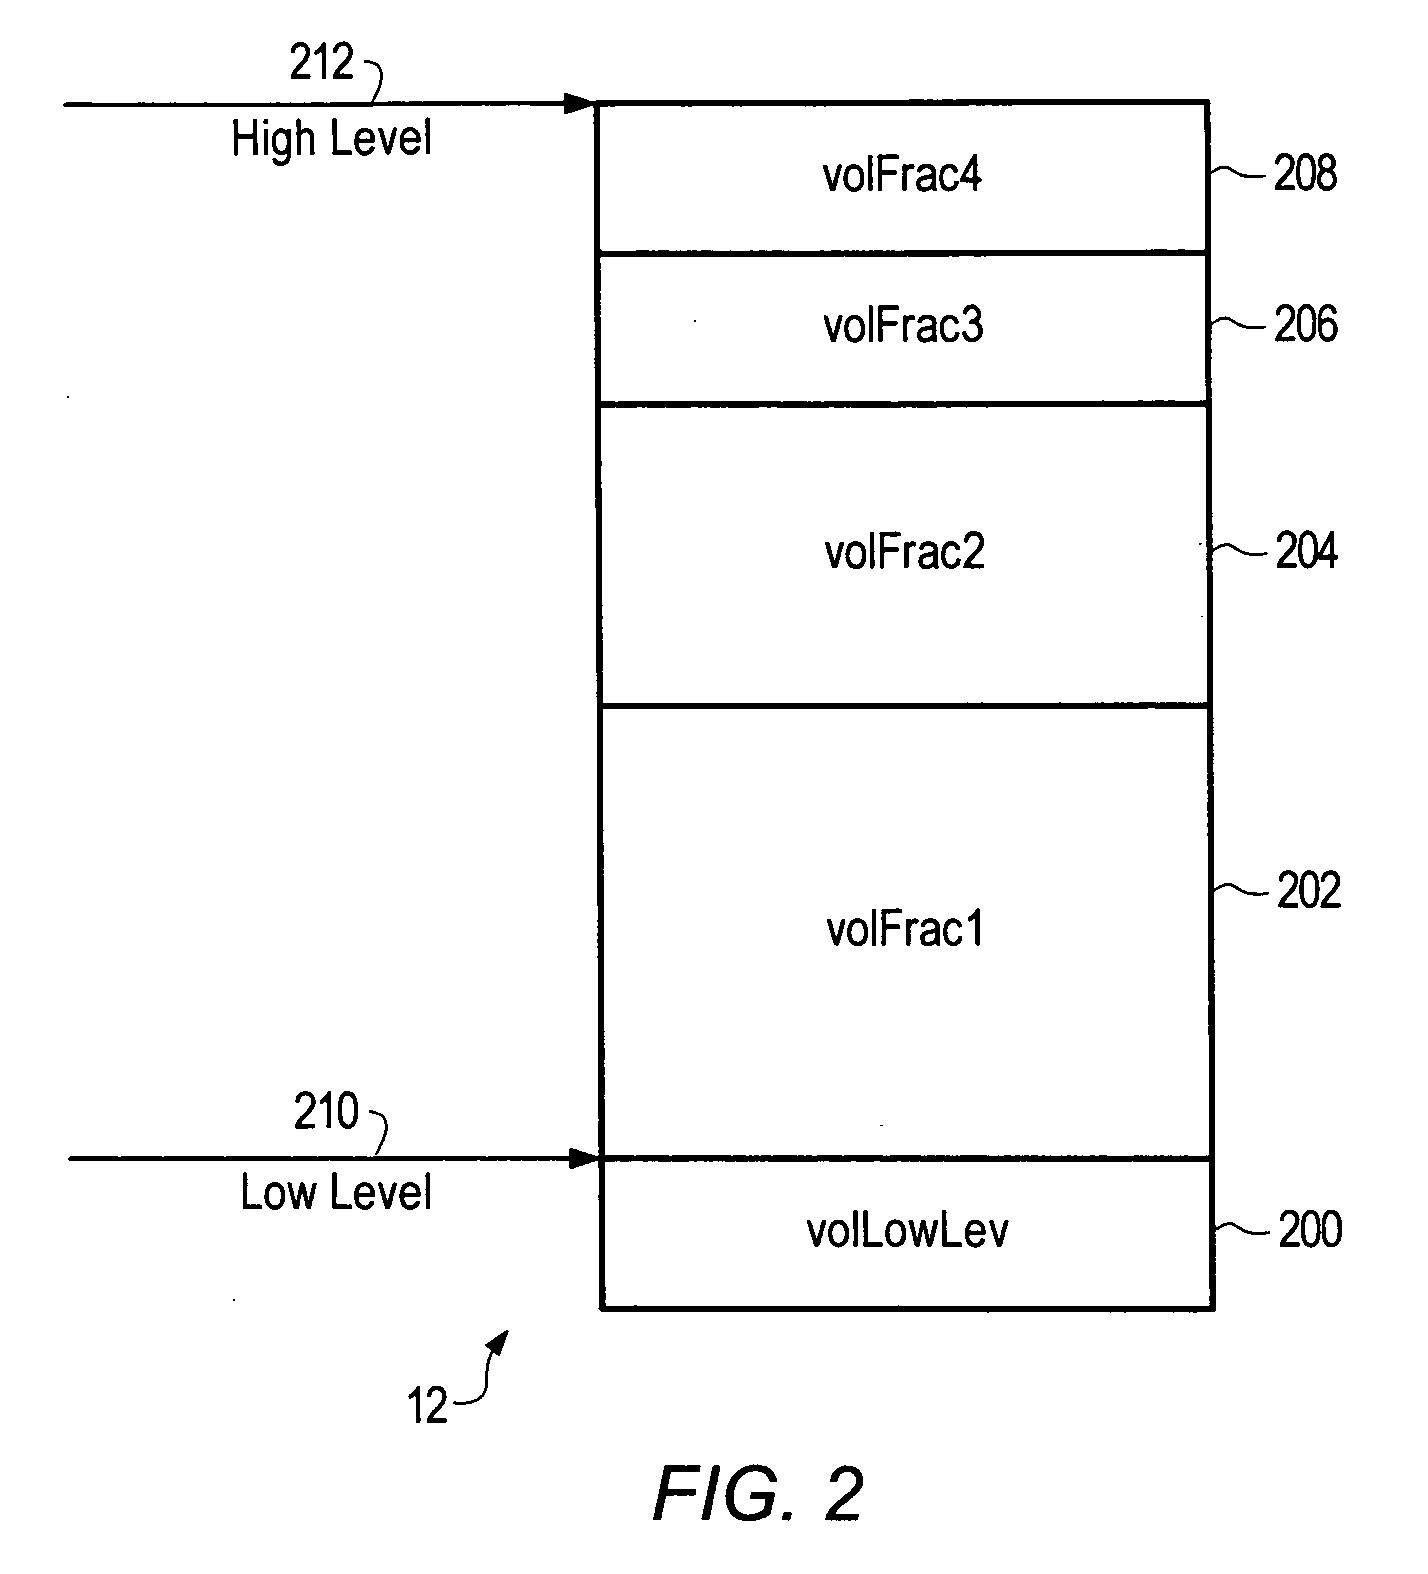 Point-of-use mixing method with standard deviation homogeneity monitoring